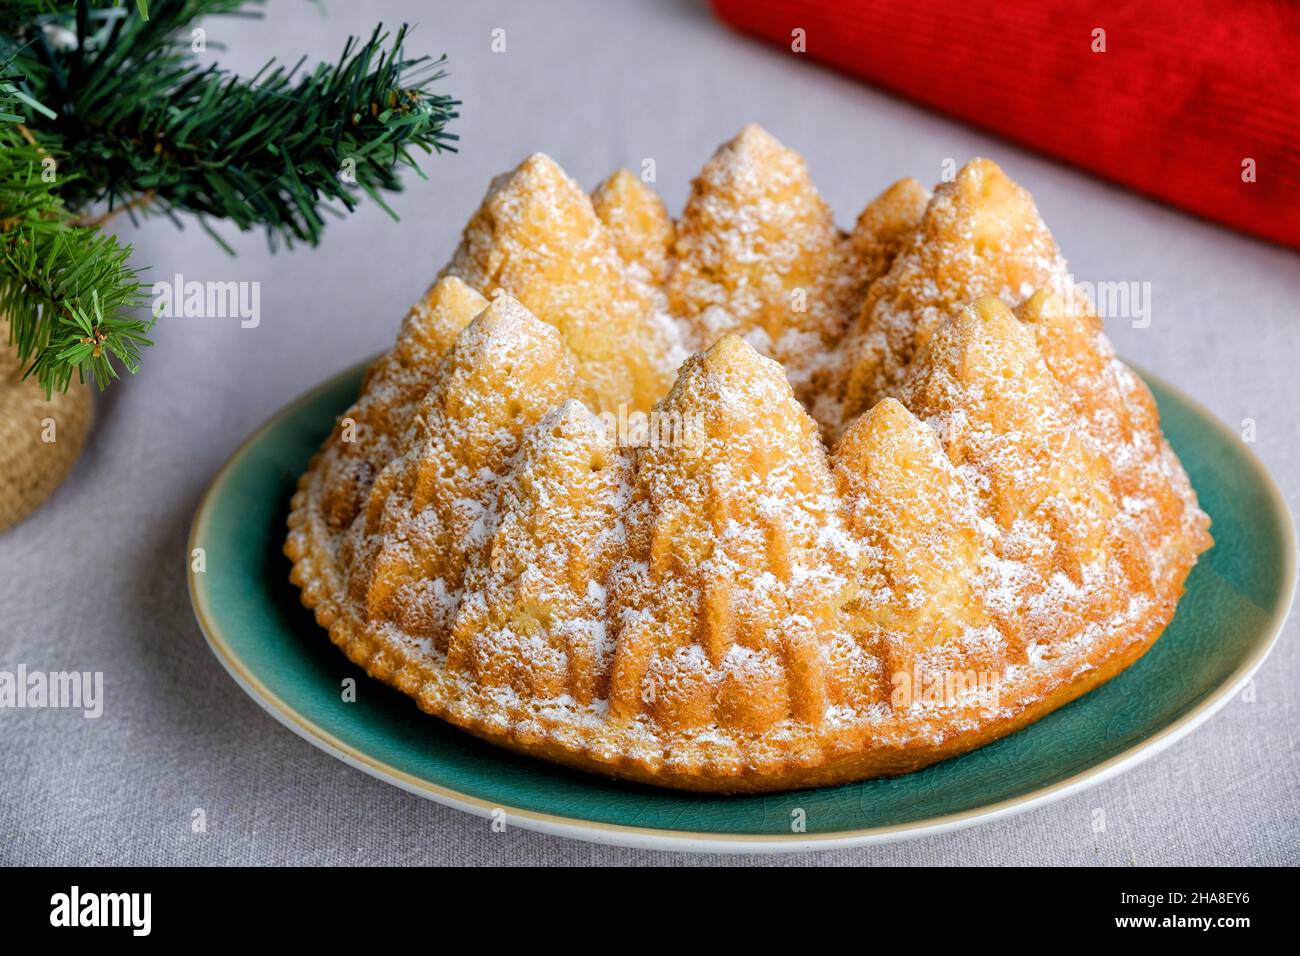 A festive christmas fir tree vanilla cake. The cake is made using a Bundt tin to form the cake batter into the tree shapes. A sprinkle of icing sugar Stock Photo